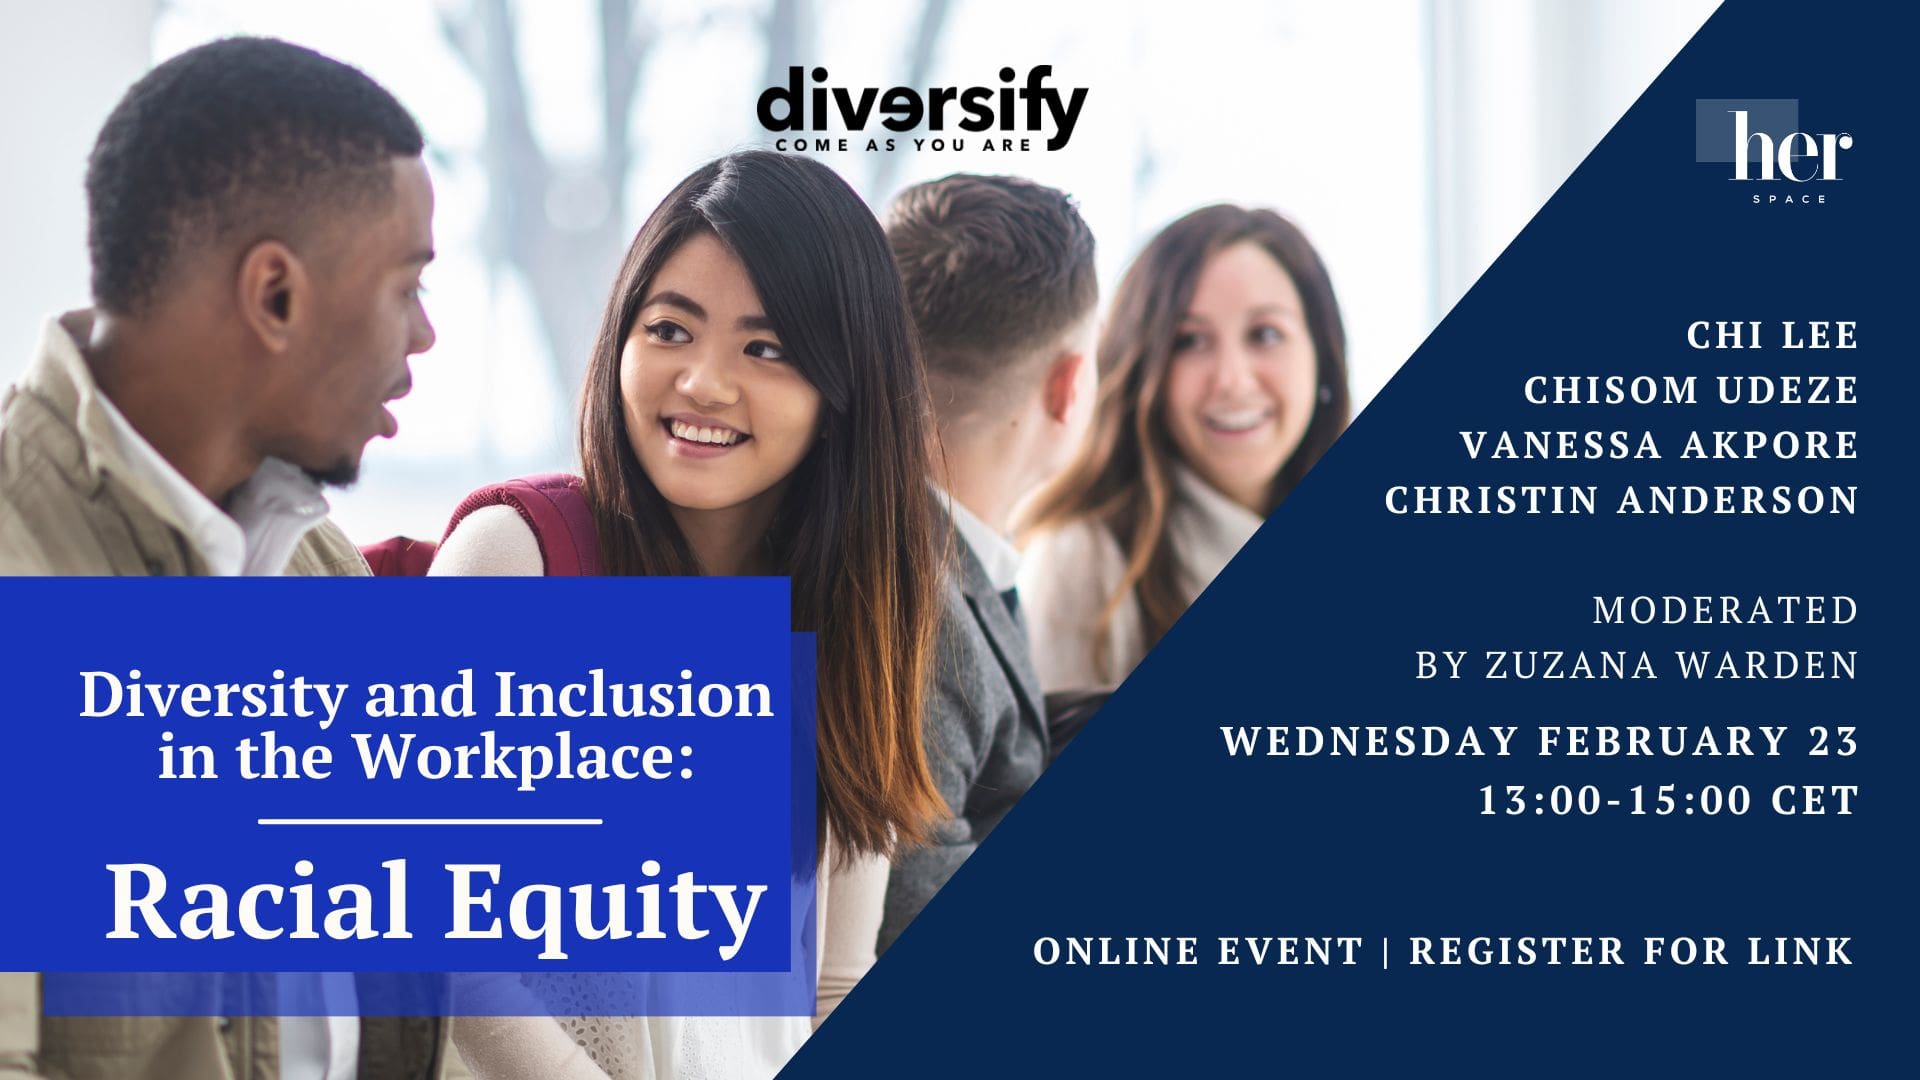 Diversity and Inclusion in the Workplace: Racial Equity